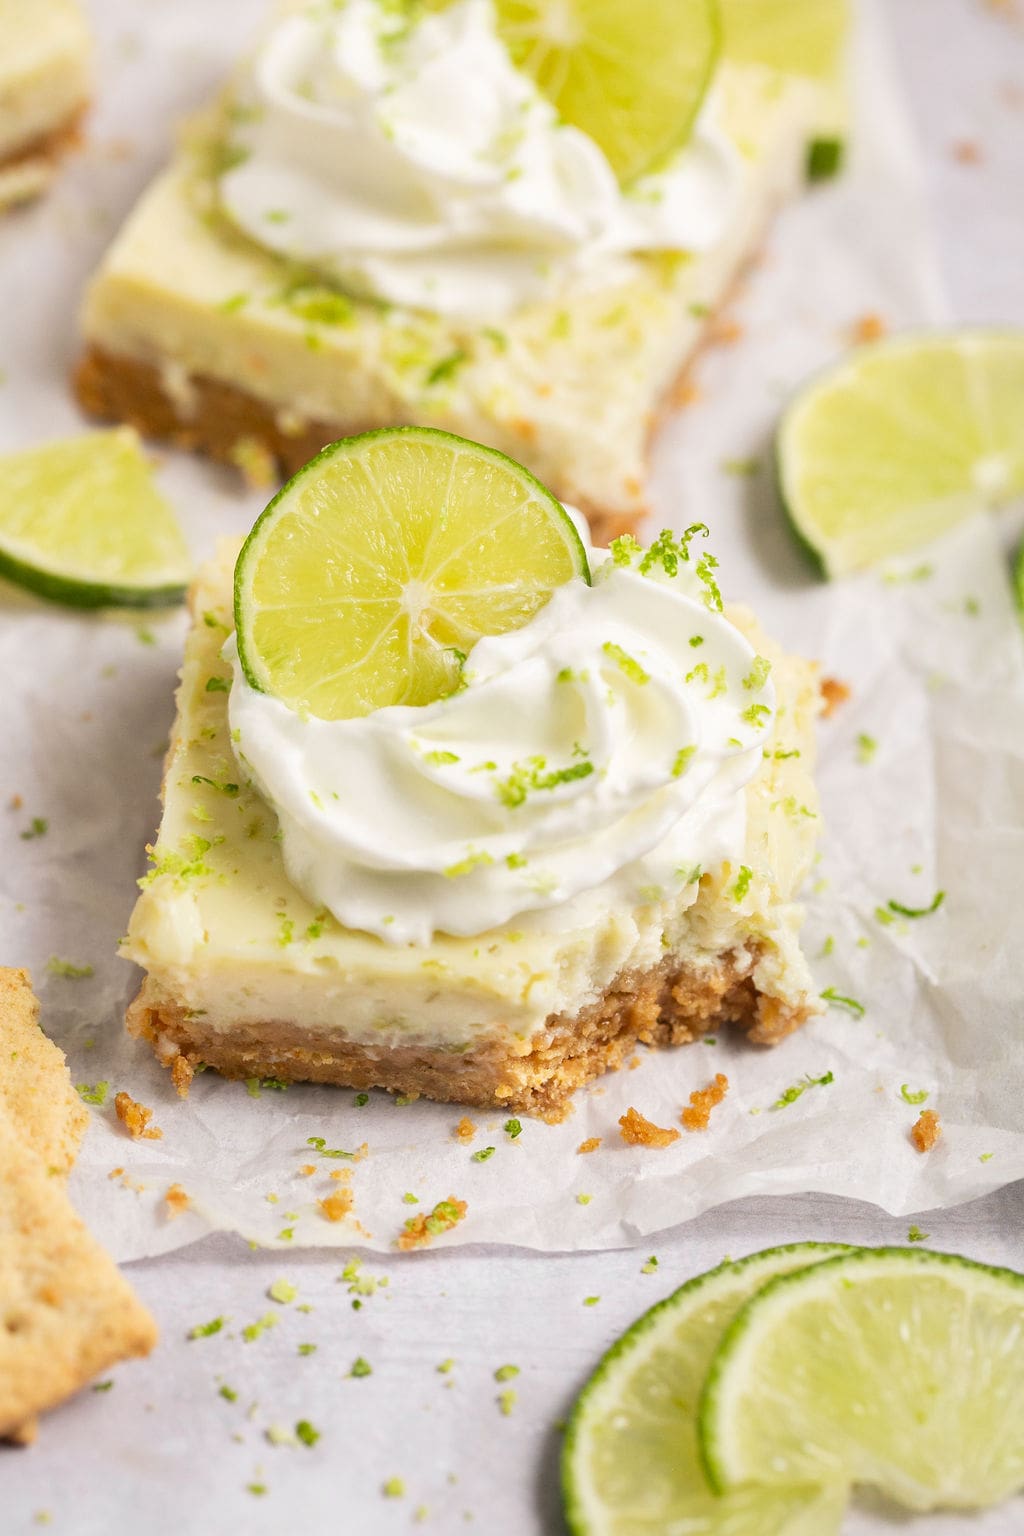 Key lime pie bars on parchment paper, one of which is missing a bite.